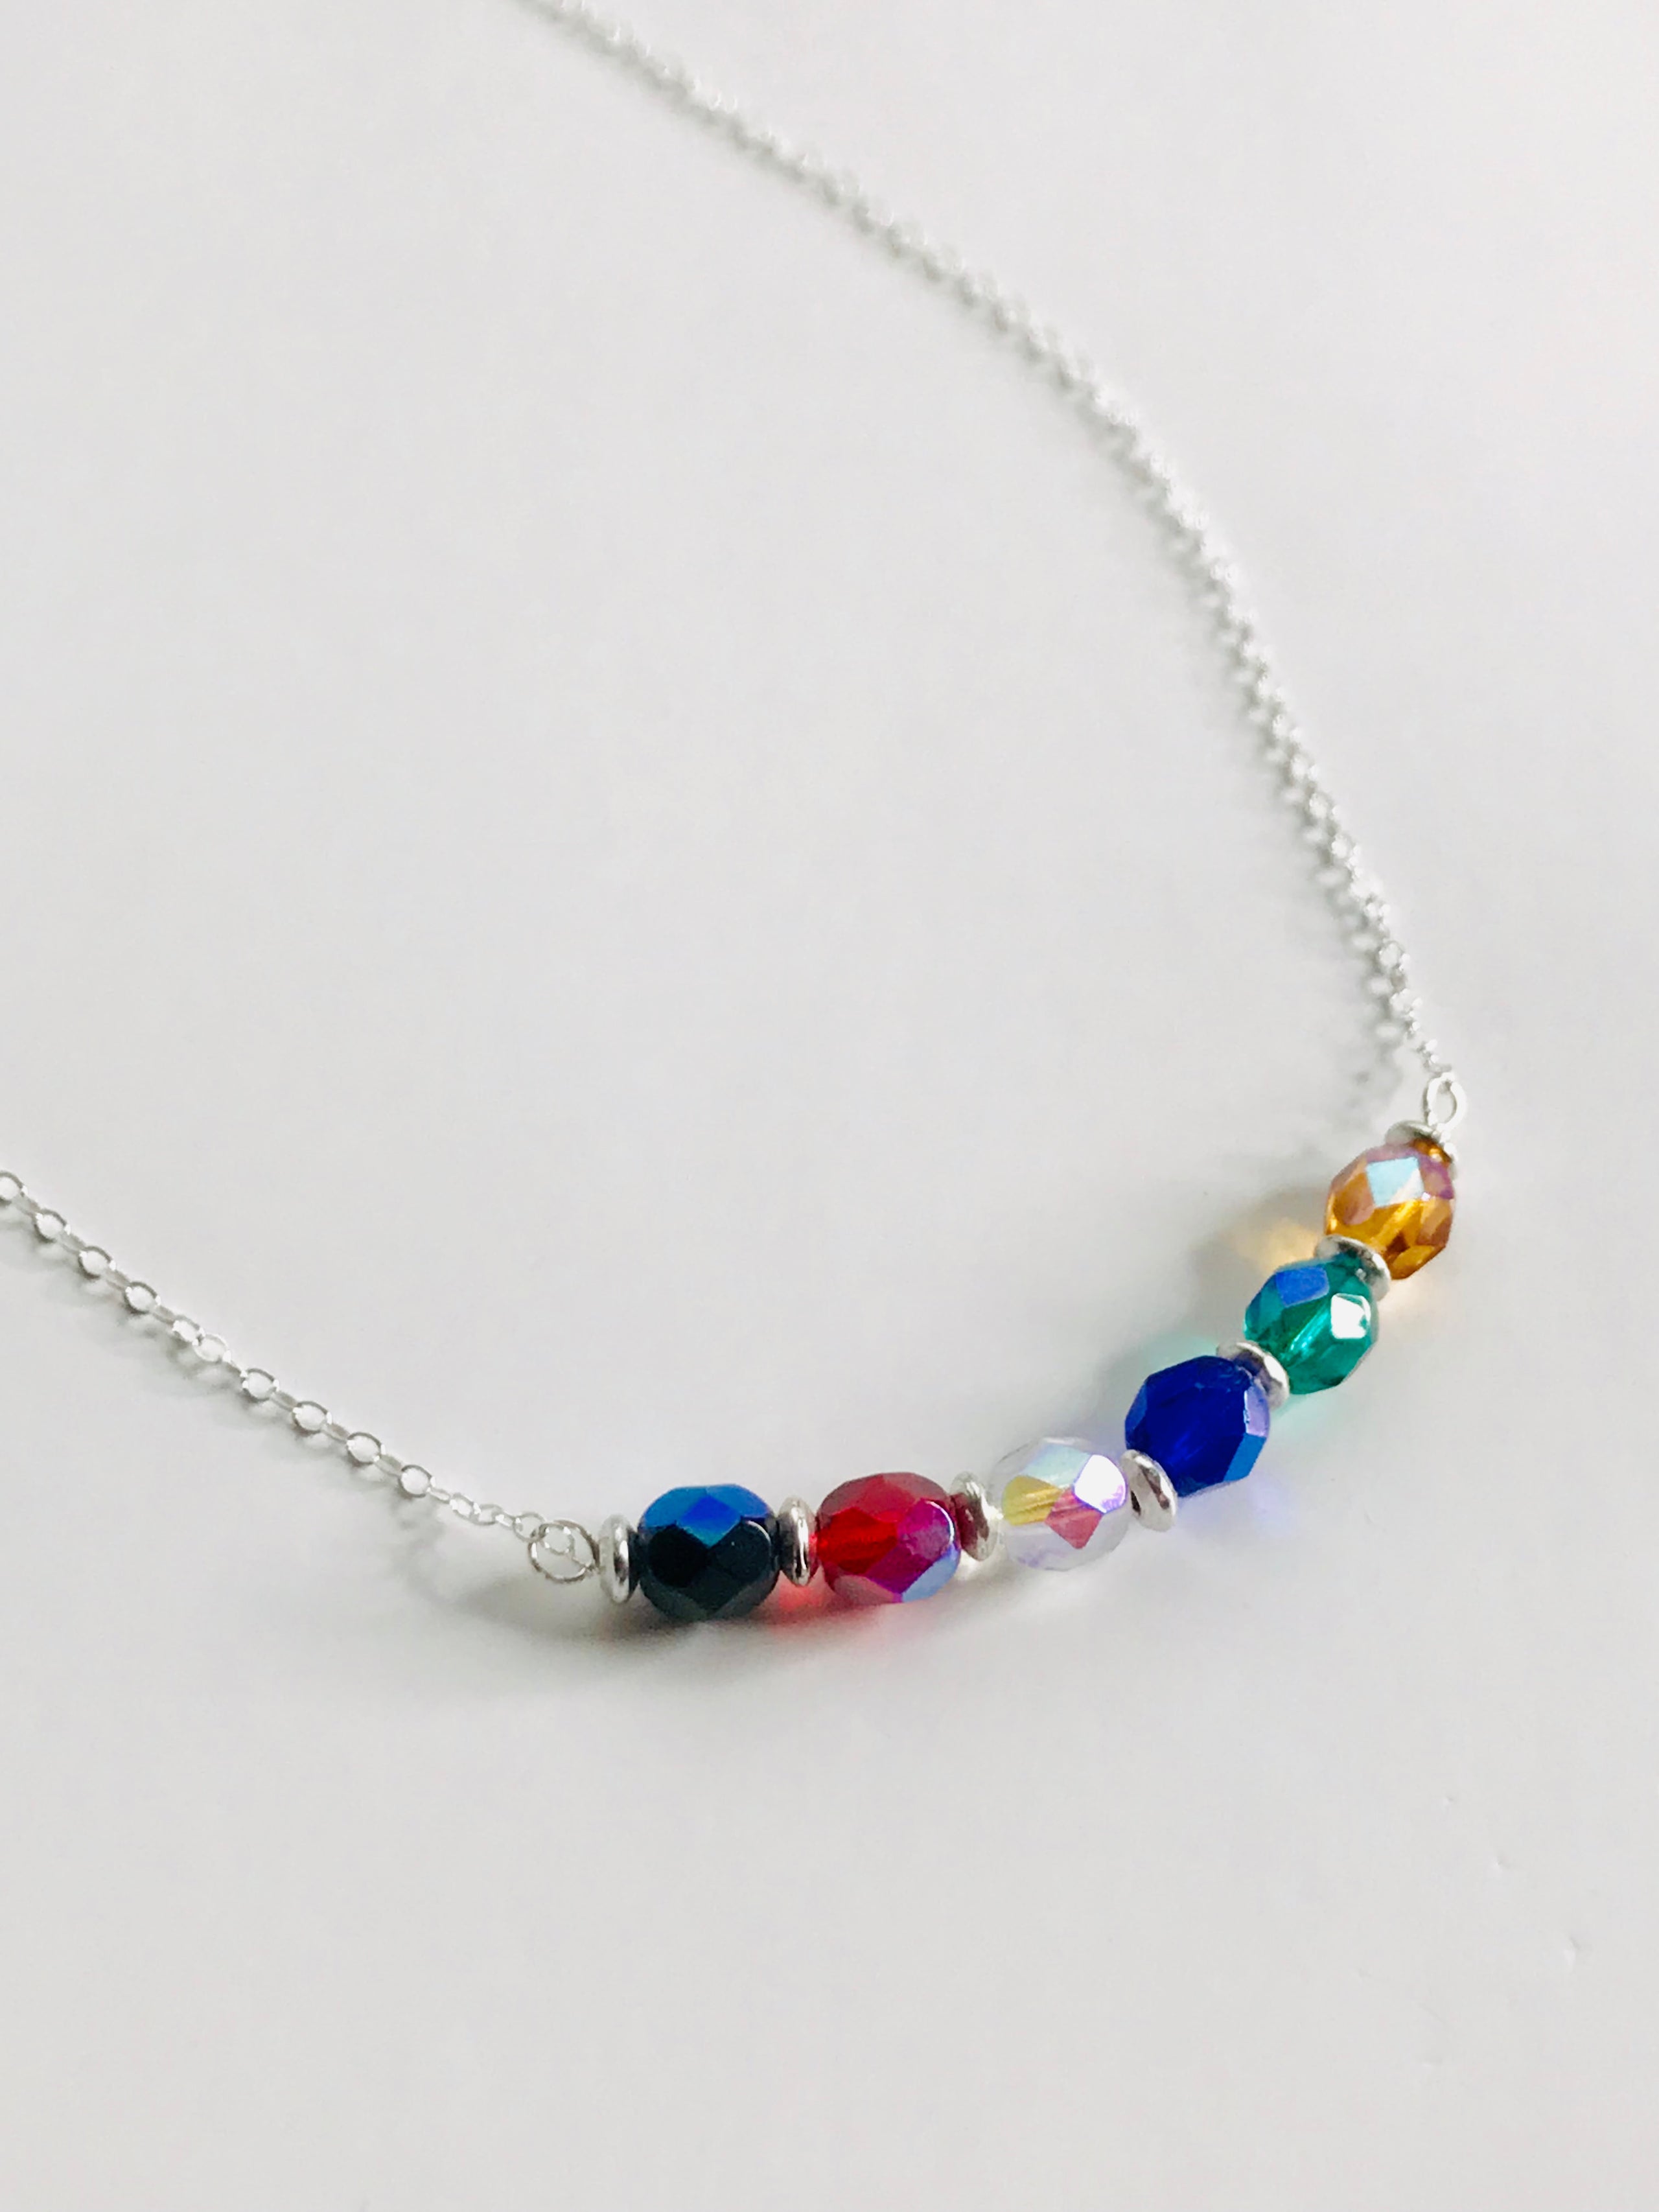 Lovely Handmade Birthstone Bar Necklaces Celebrate Your Special Occasions